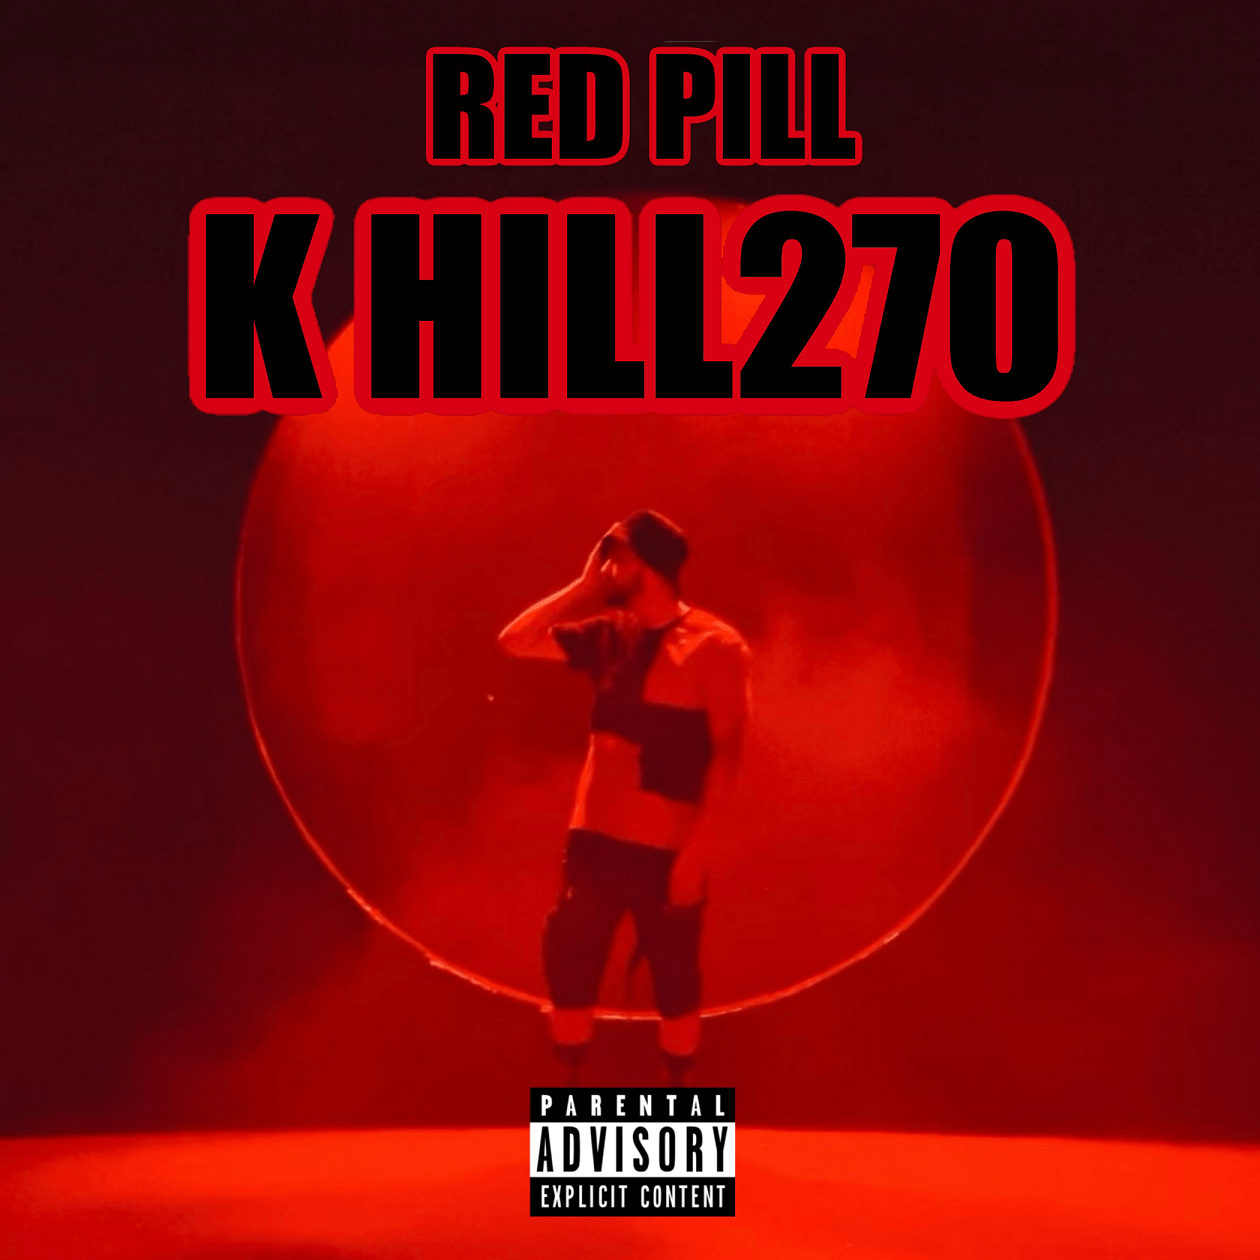 K Hill270 Introduces Red Pill to the World